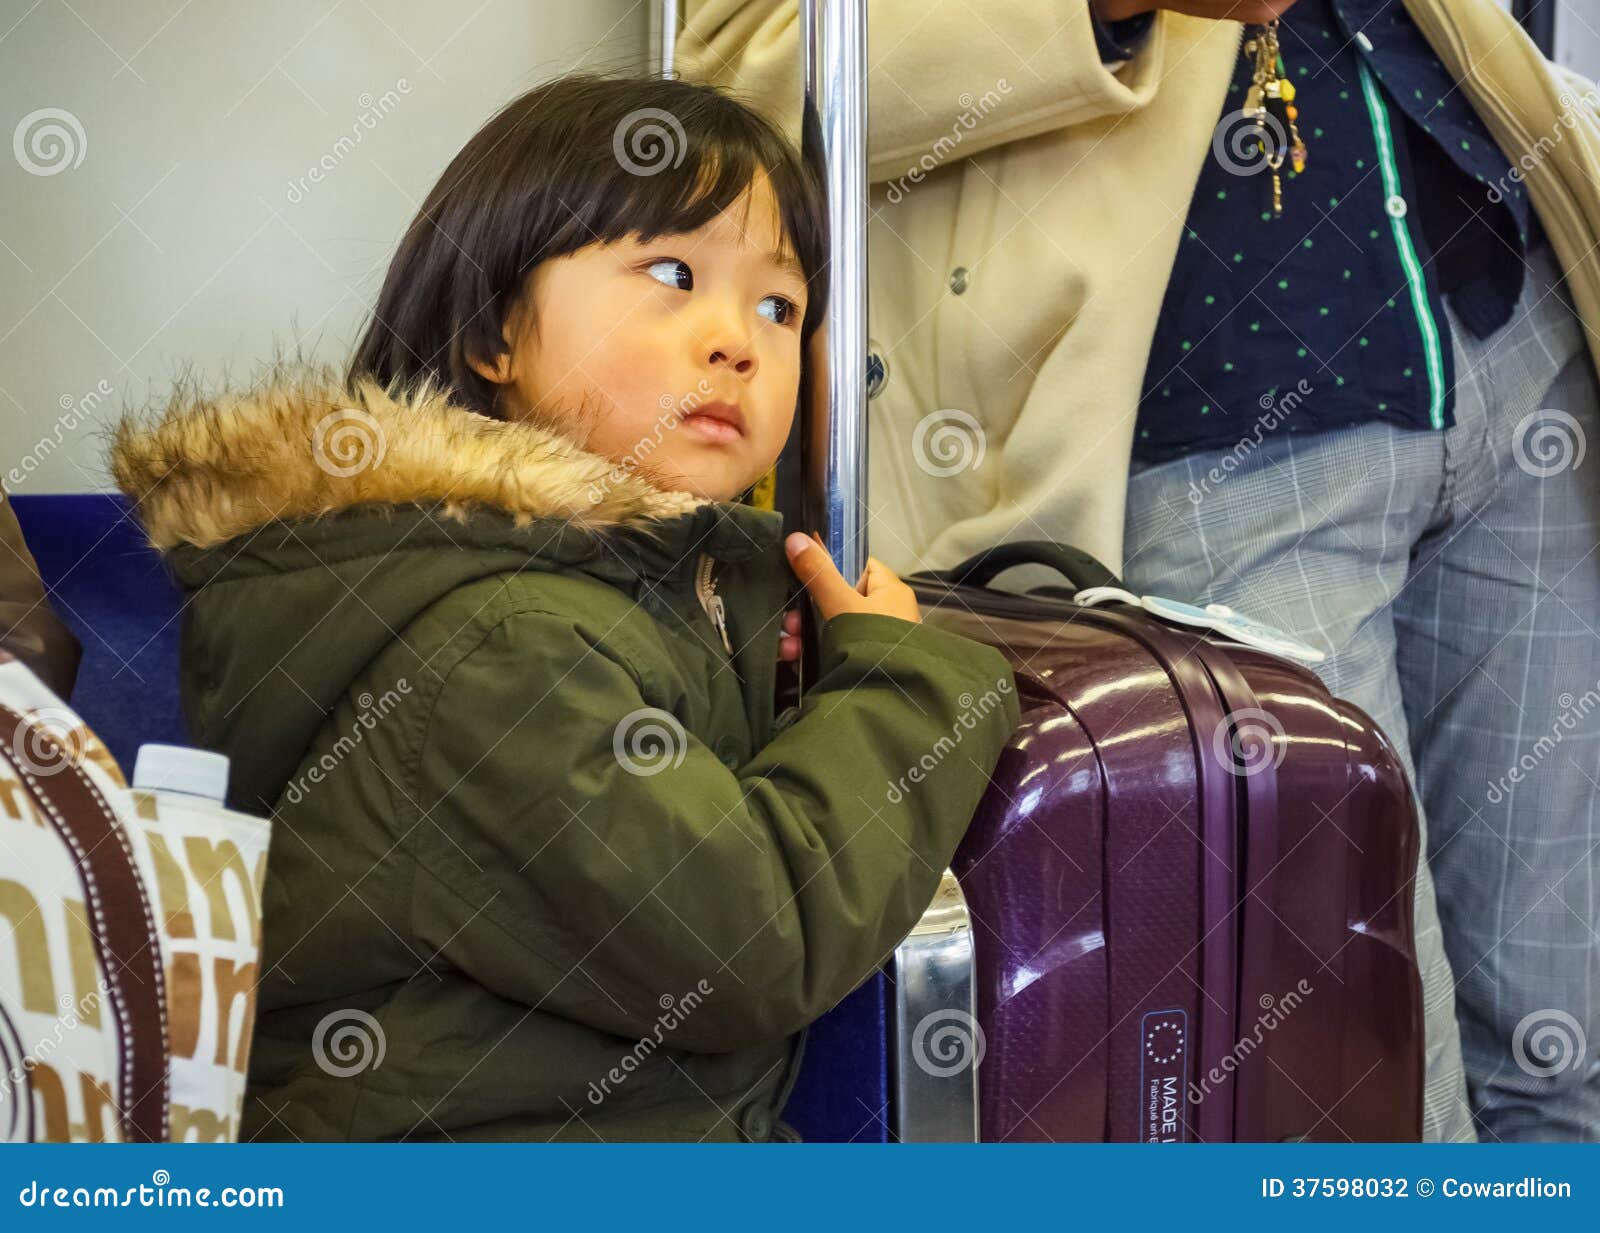 Japanese Girl On A Train Editorial Image 37598032 